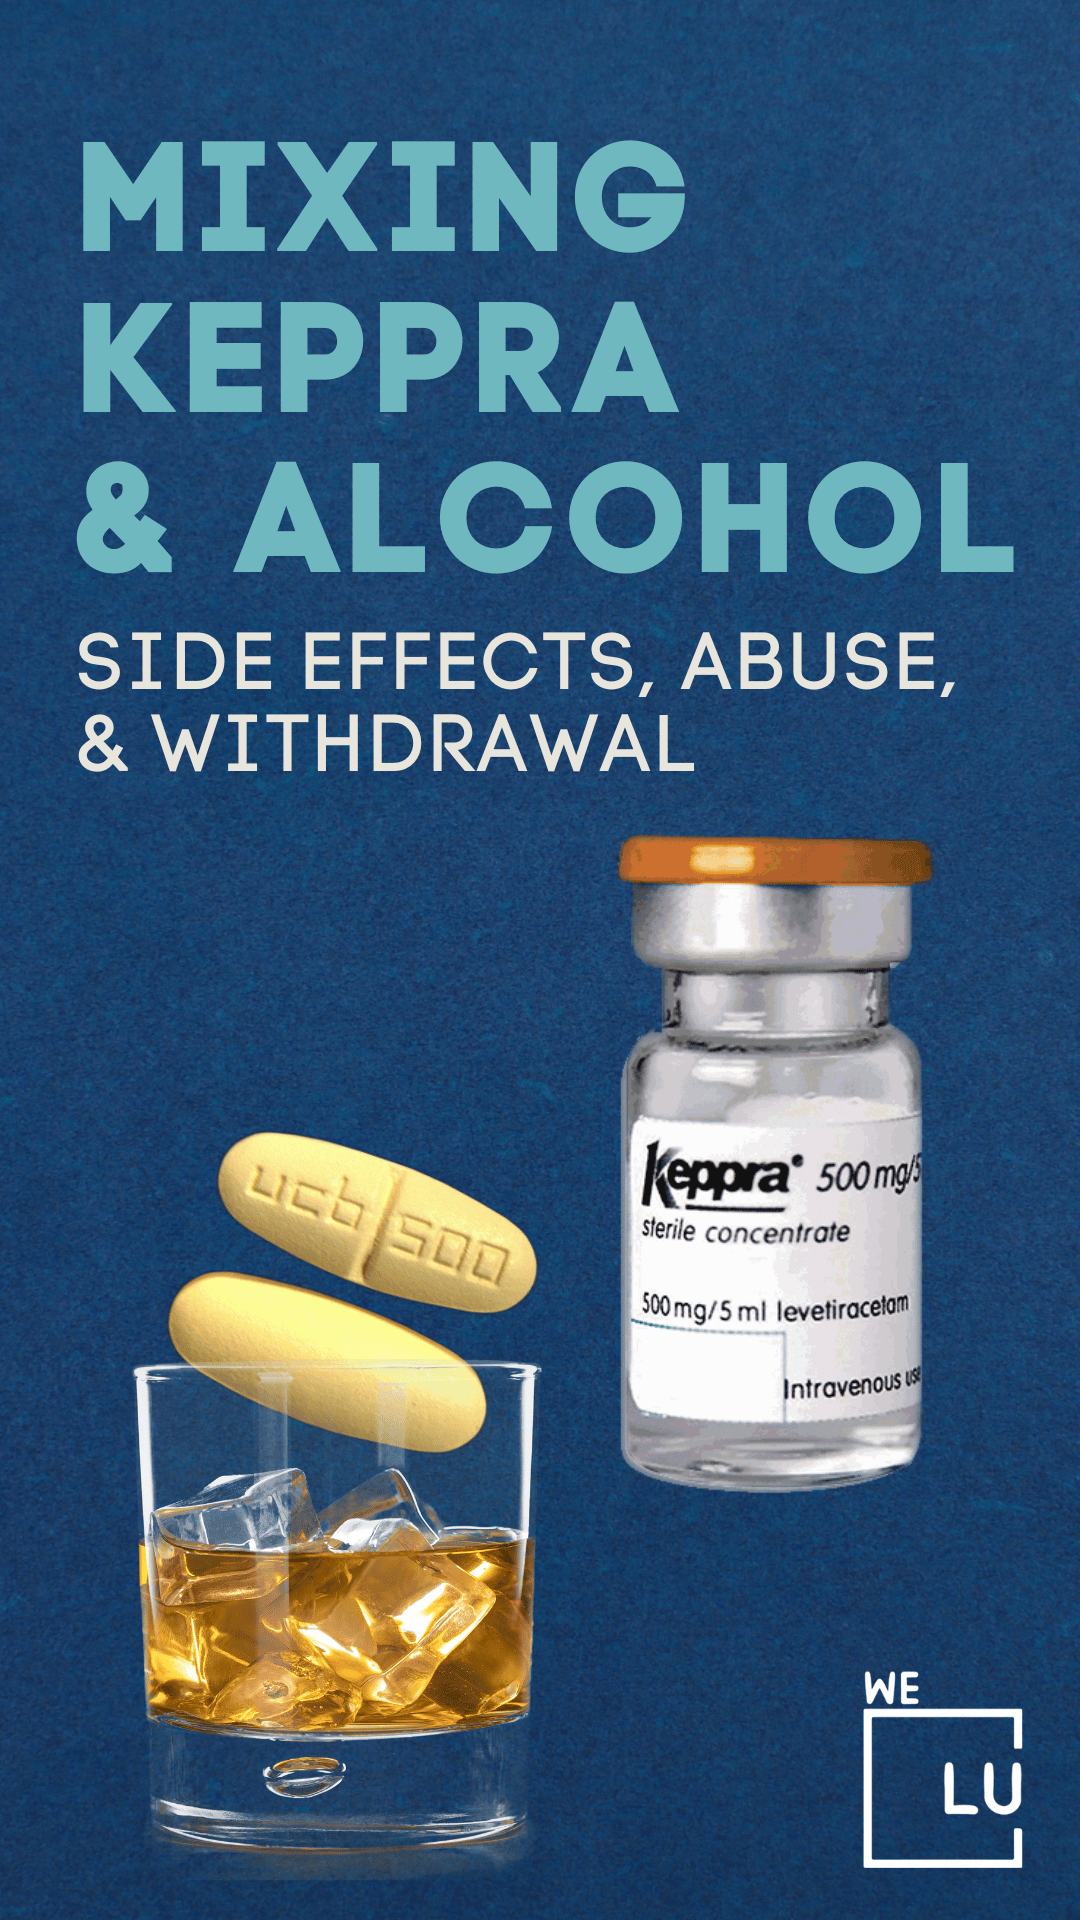 Mixing Keppra and Alcohol Side Effects, Abuse, & Withdrawal